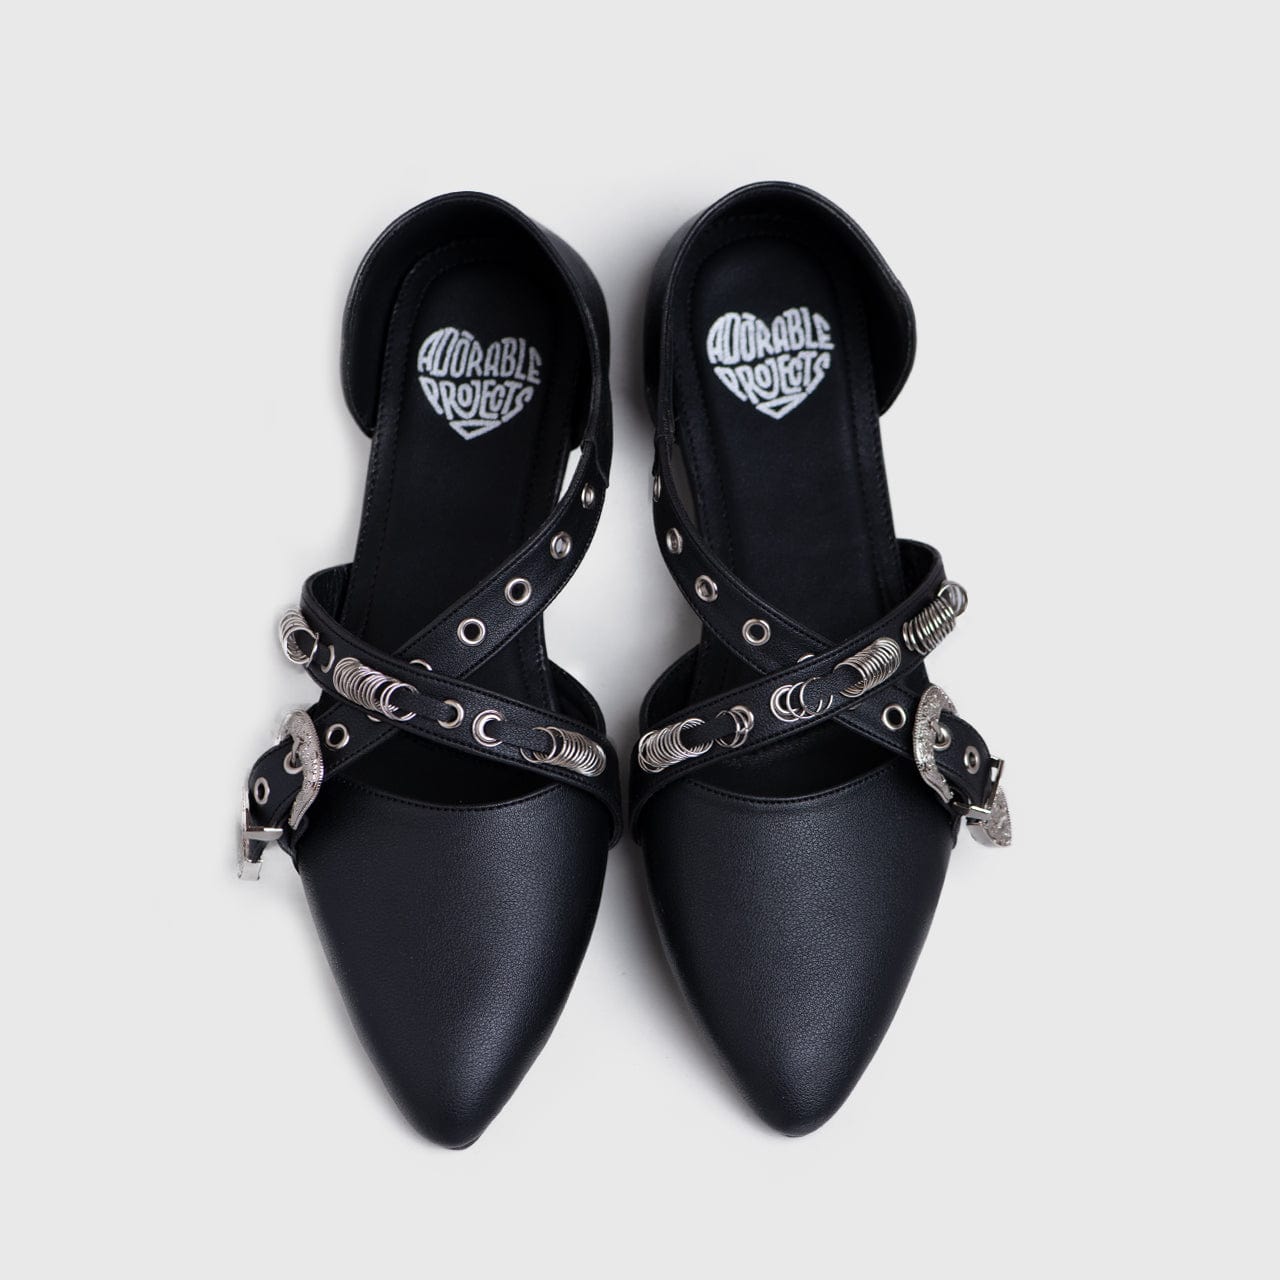 Adorable Projects Official Adorableprojects - Zyline Flat Shoes Black - Sepatu Flat